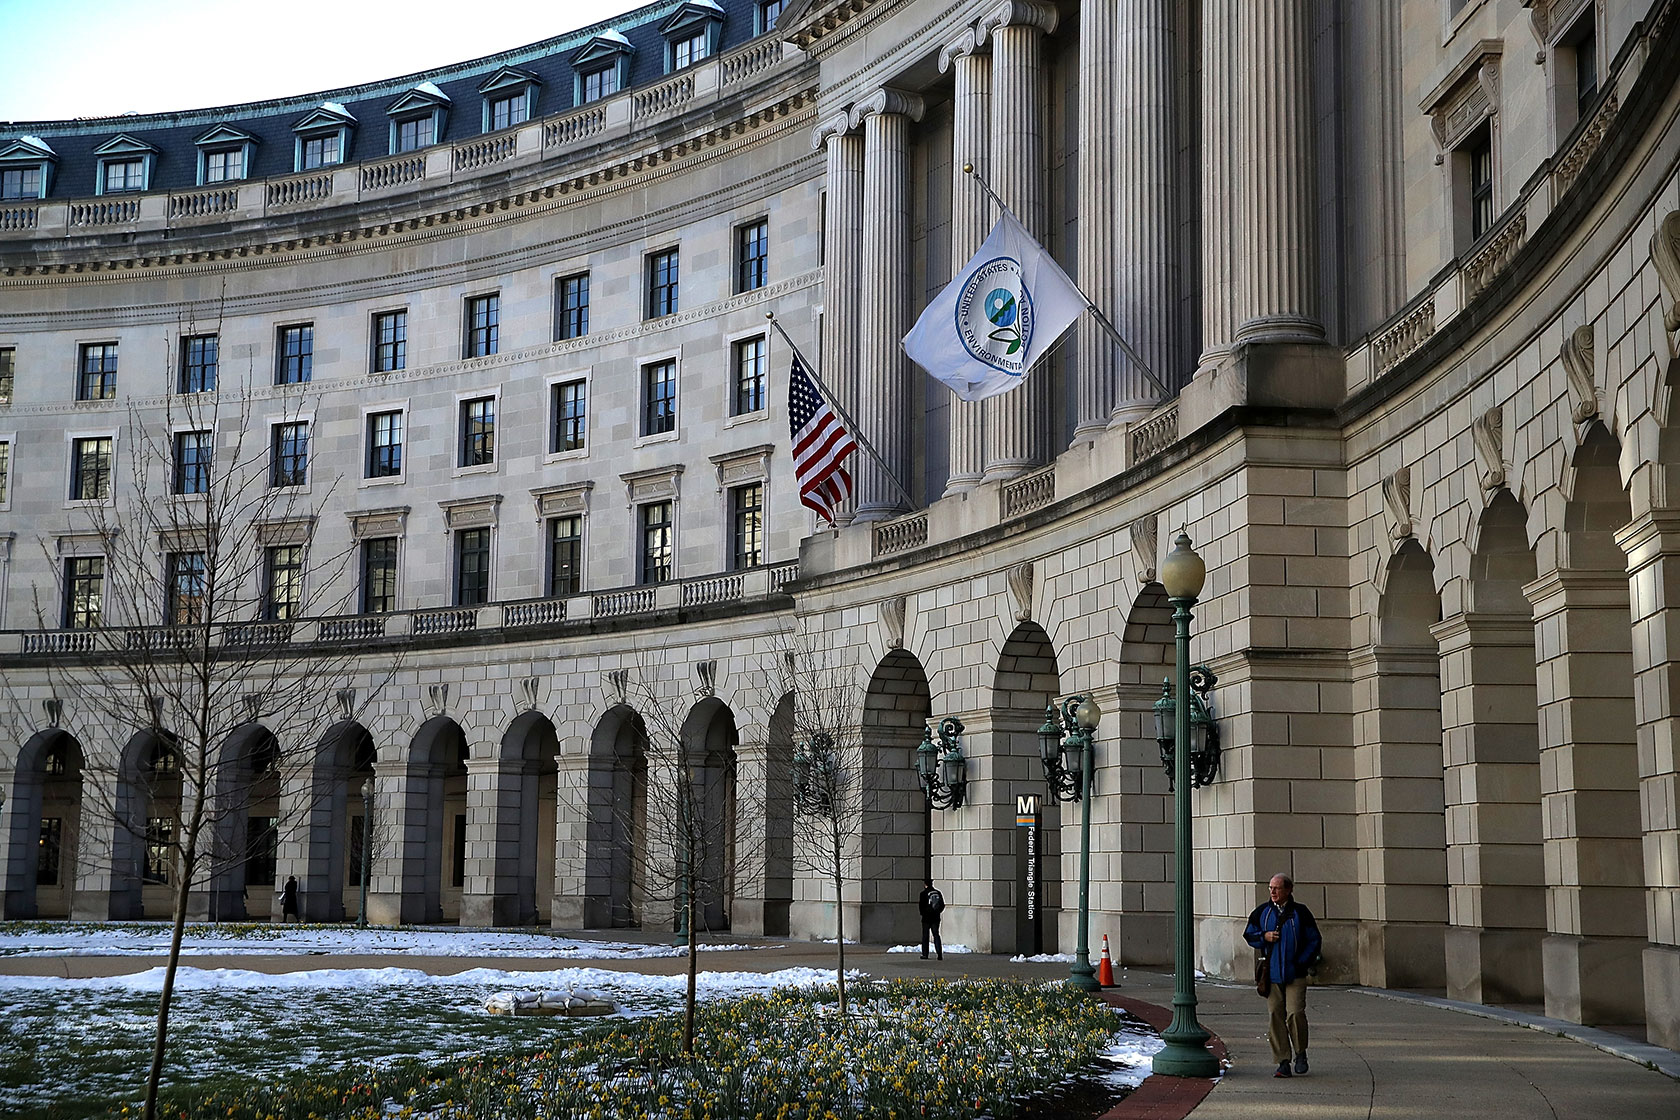 Photo shows a partial view of the EPA building, with a U.S. and EPA flag flying in front, and two people walking on the sidewalk